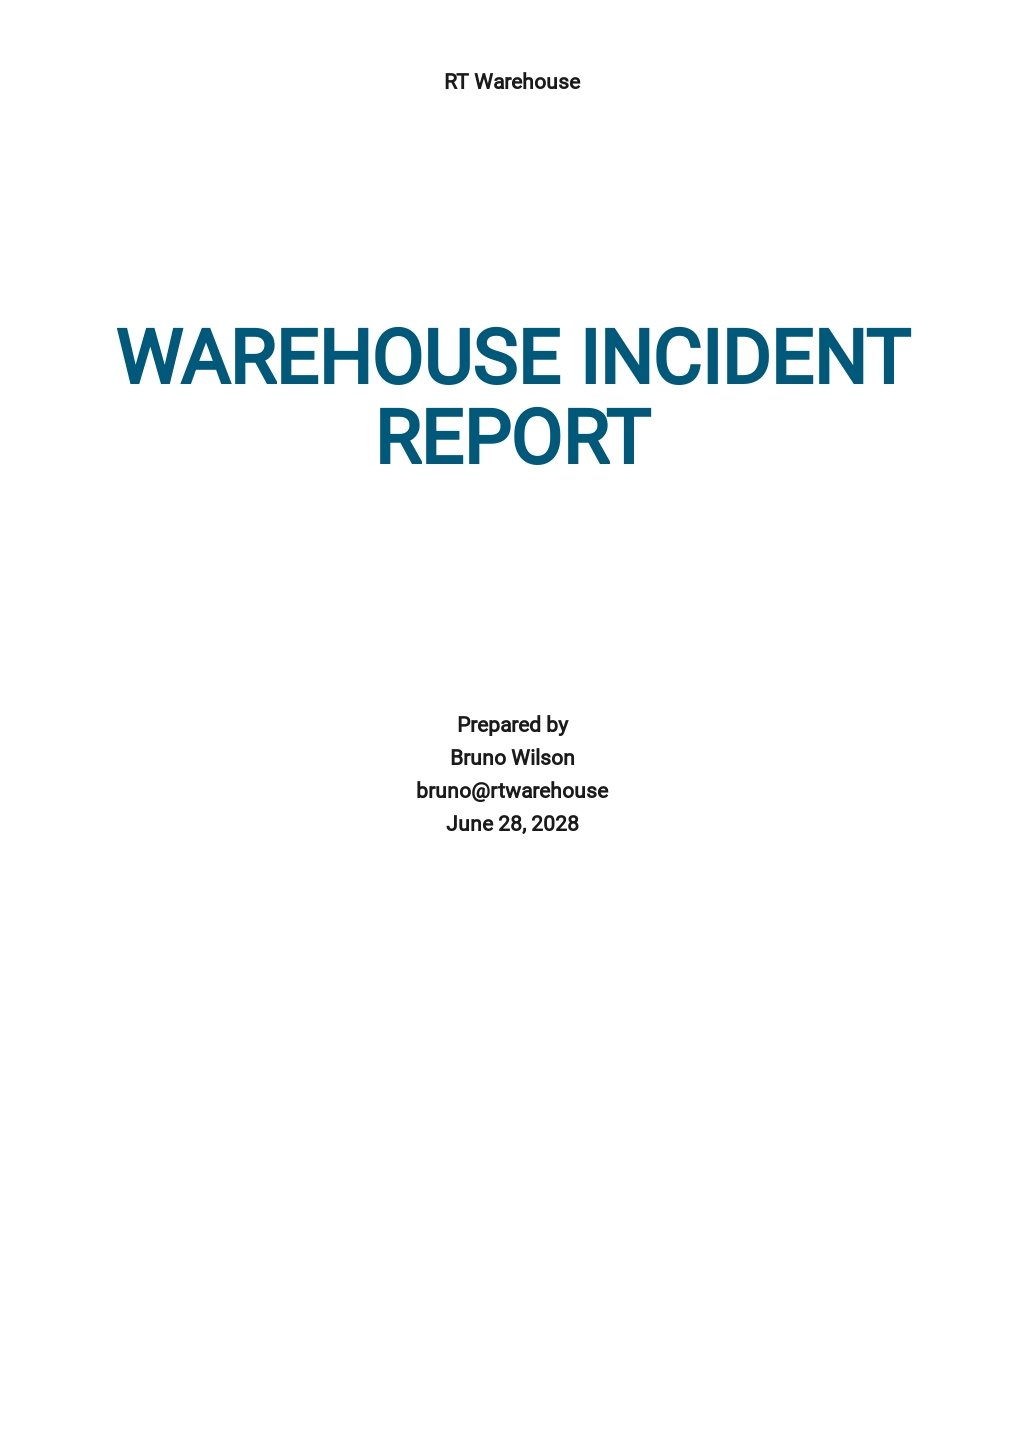 Free Incident Report Template.jpe